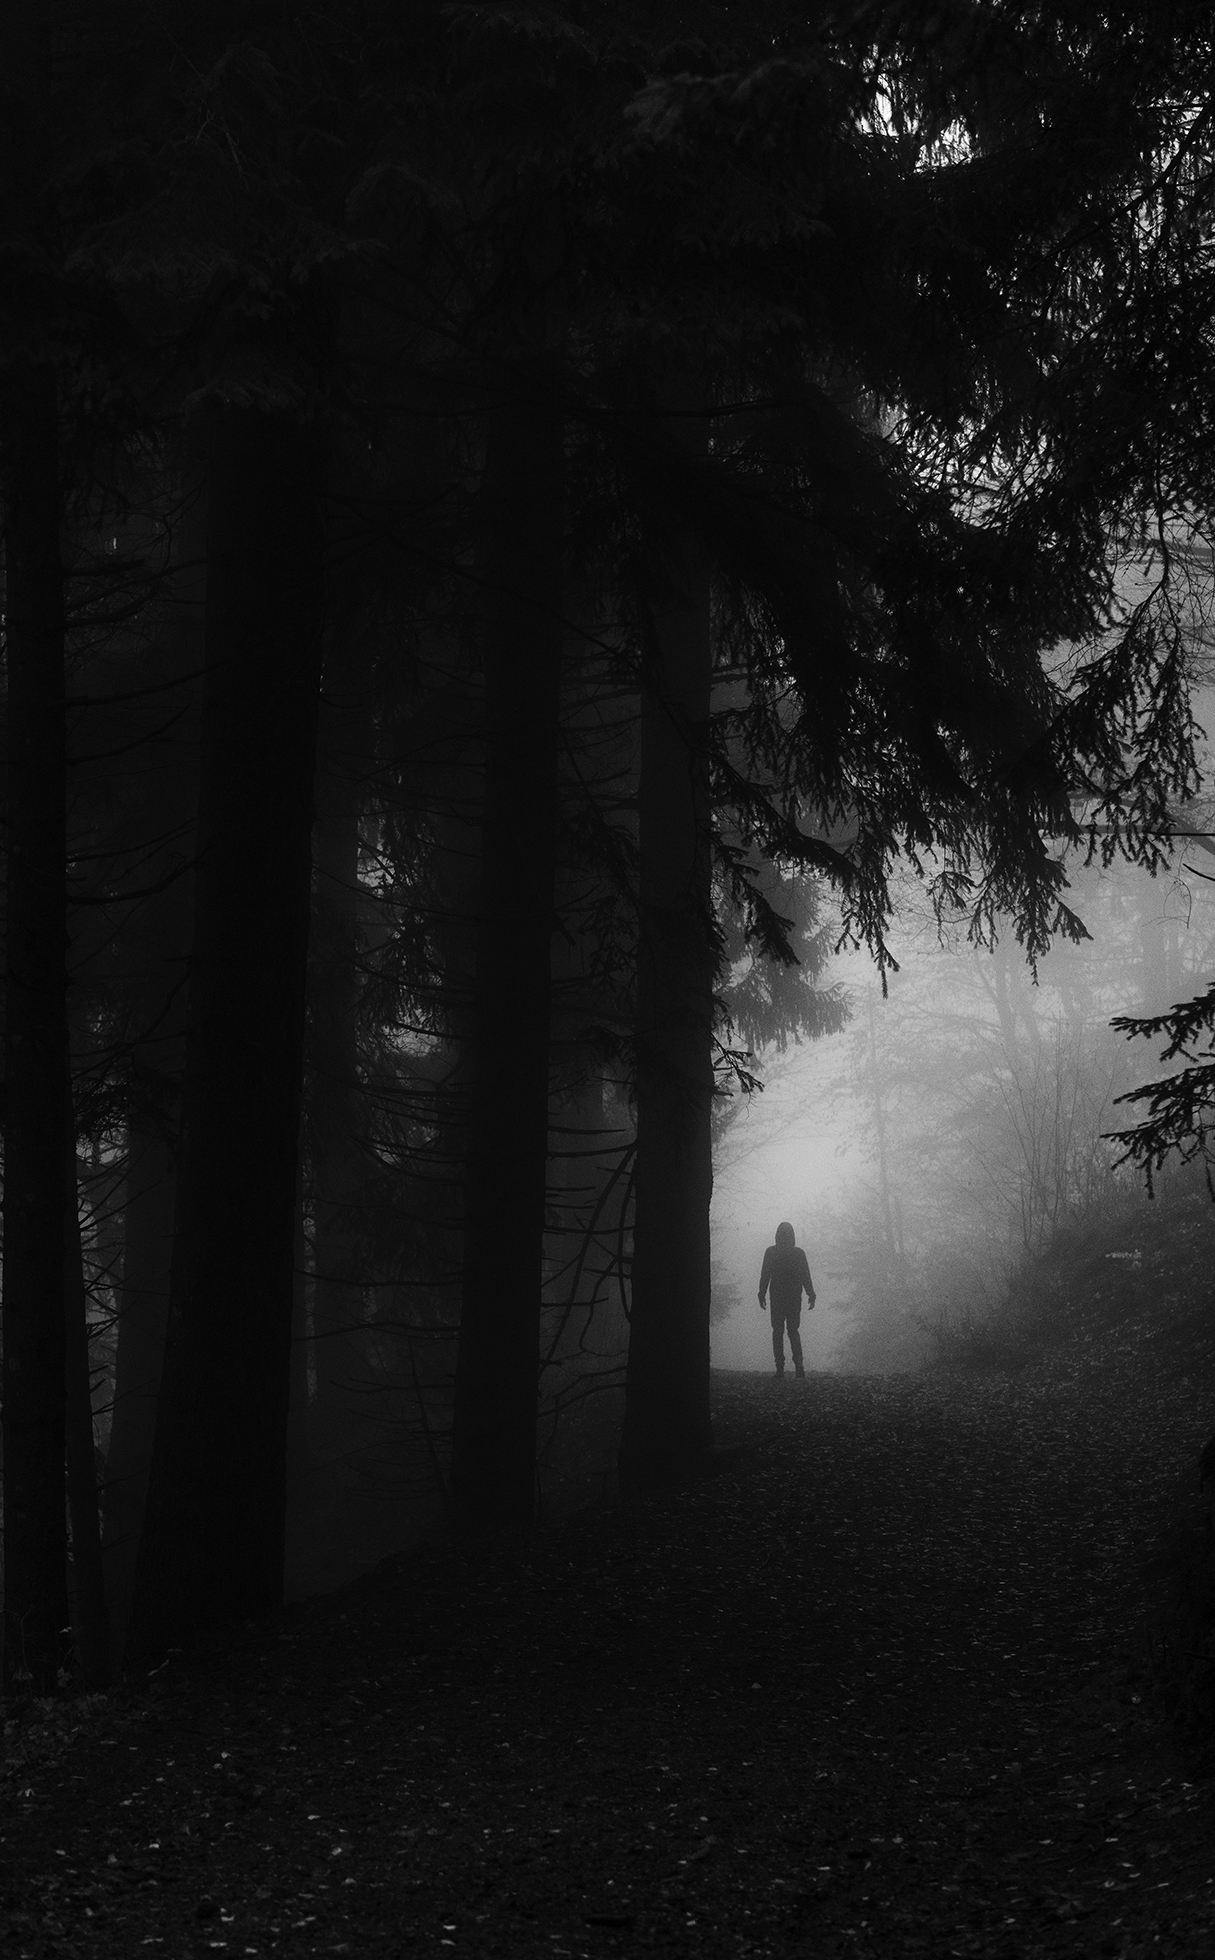 A silhouette of a person looks small against the large silhouettes and darkness of the forest surrounding them.